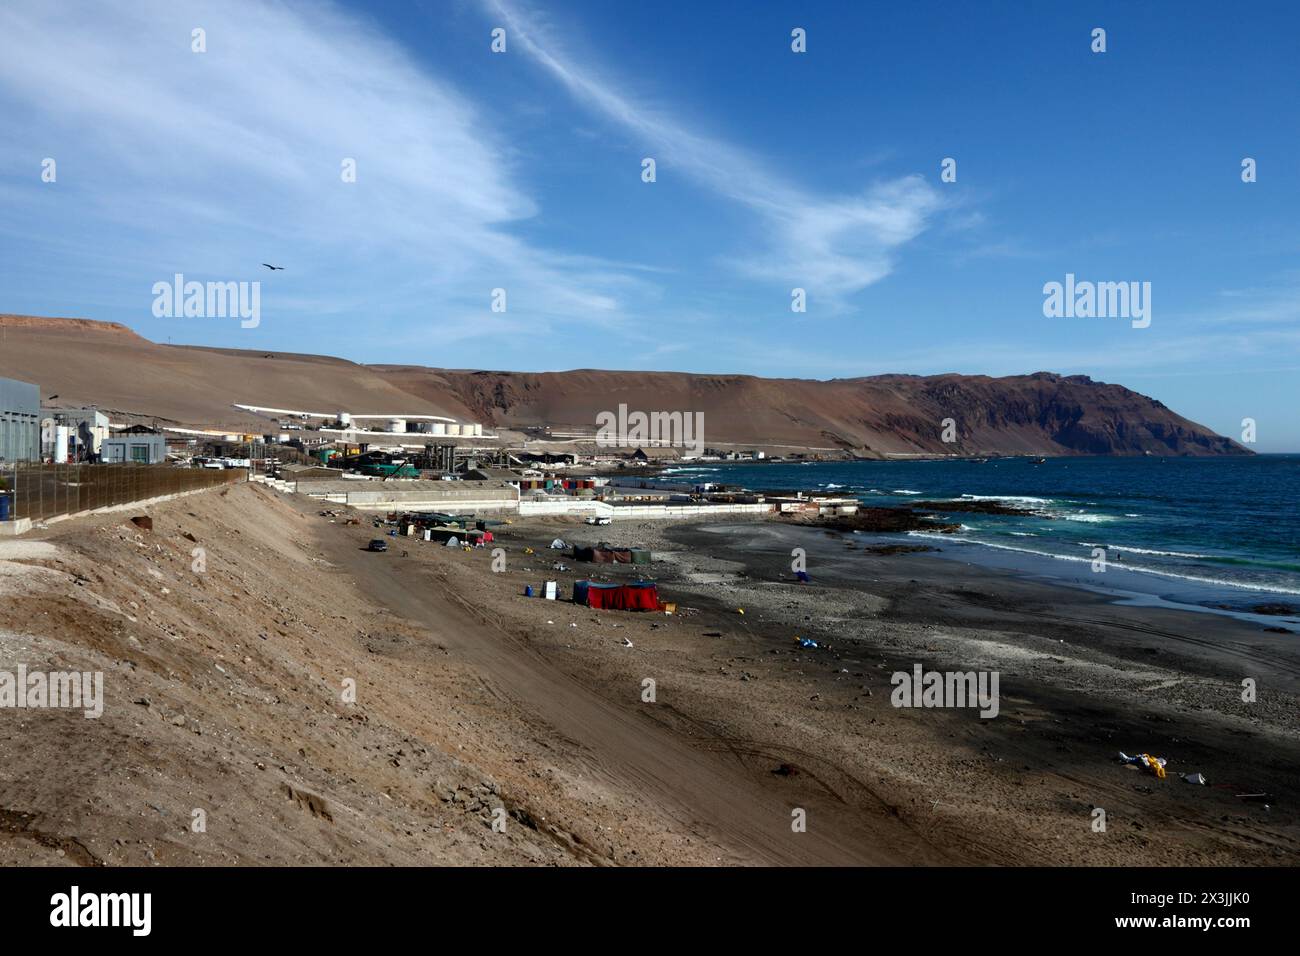 Temporary camps for squatters / homeless / immigrants on Playa Arenillas Negras beach next to Corpesca S.A. fish processing plant, near Arica, Chile Stock Photo